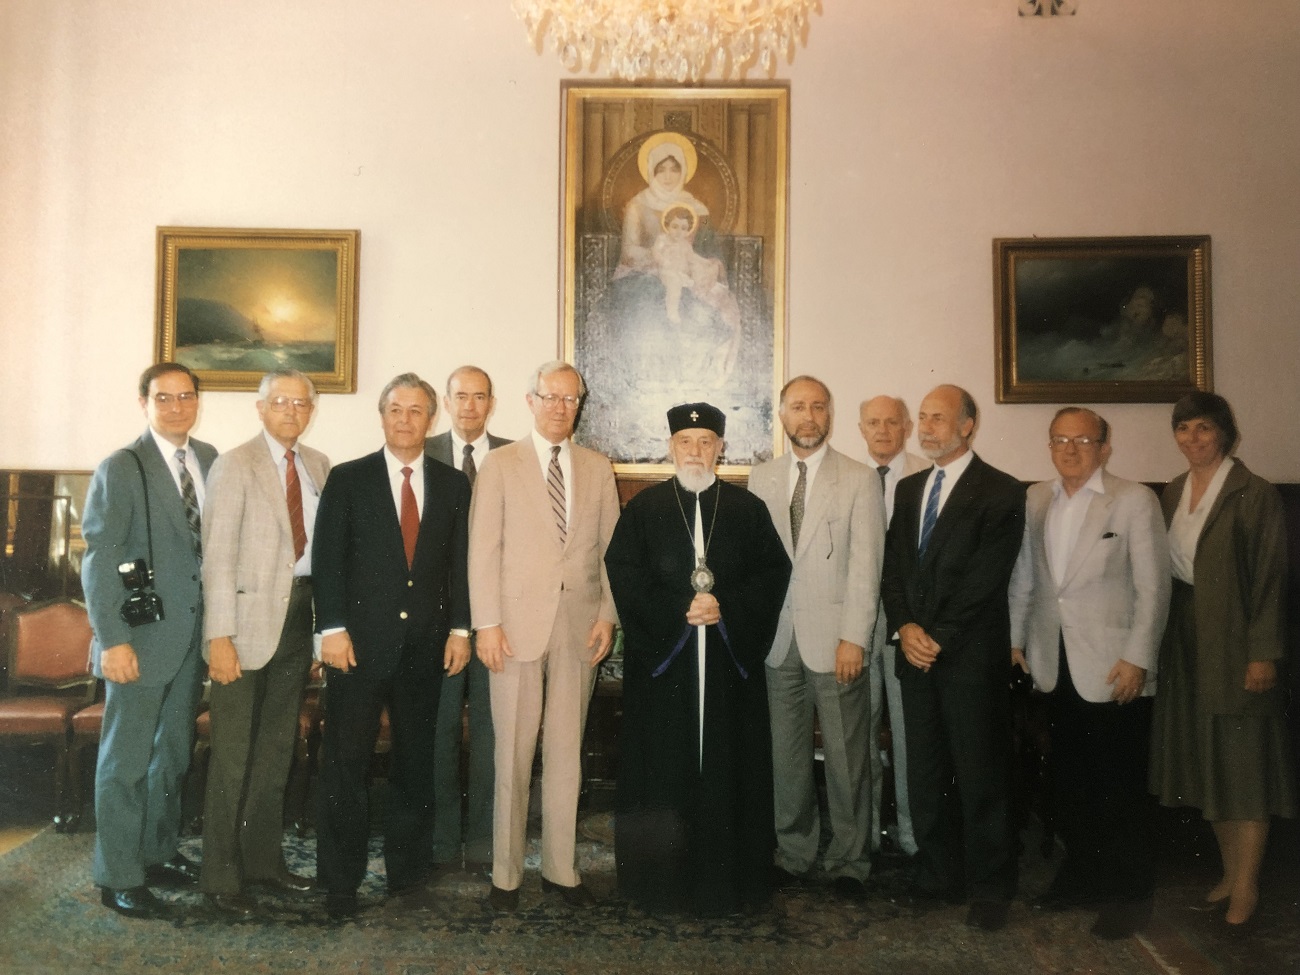 The UC delegation with the Catholicos of All Armenians, His Holiness Vazken I.